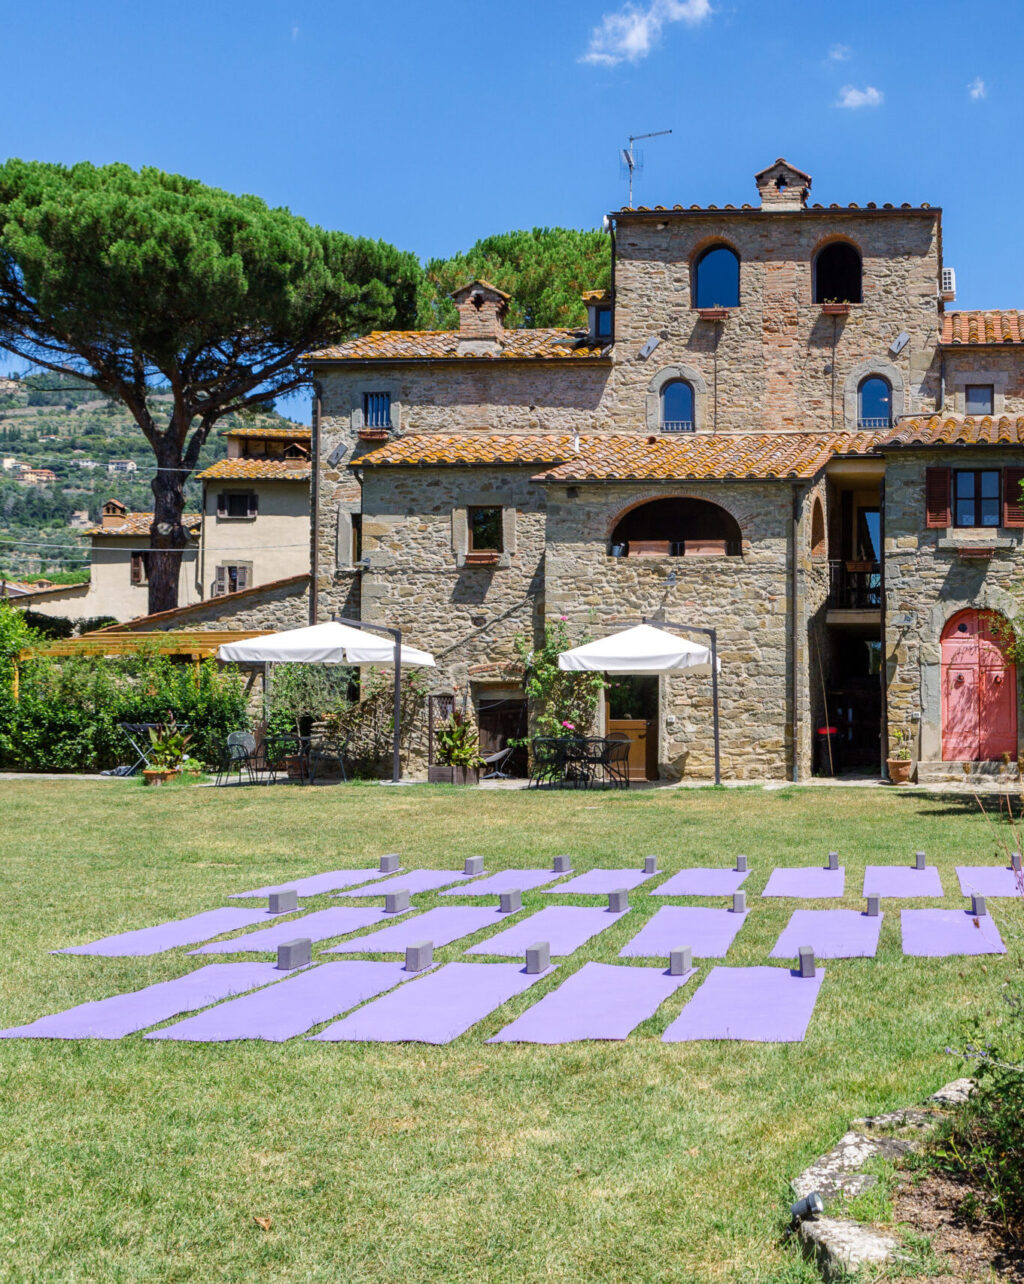 image of yoga mats on lawn in front of monastero